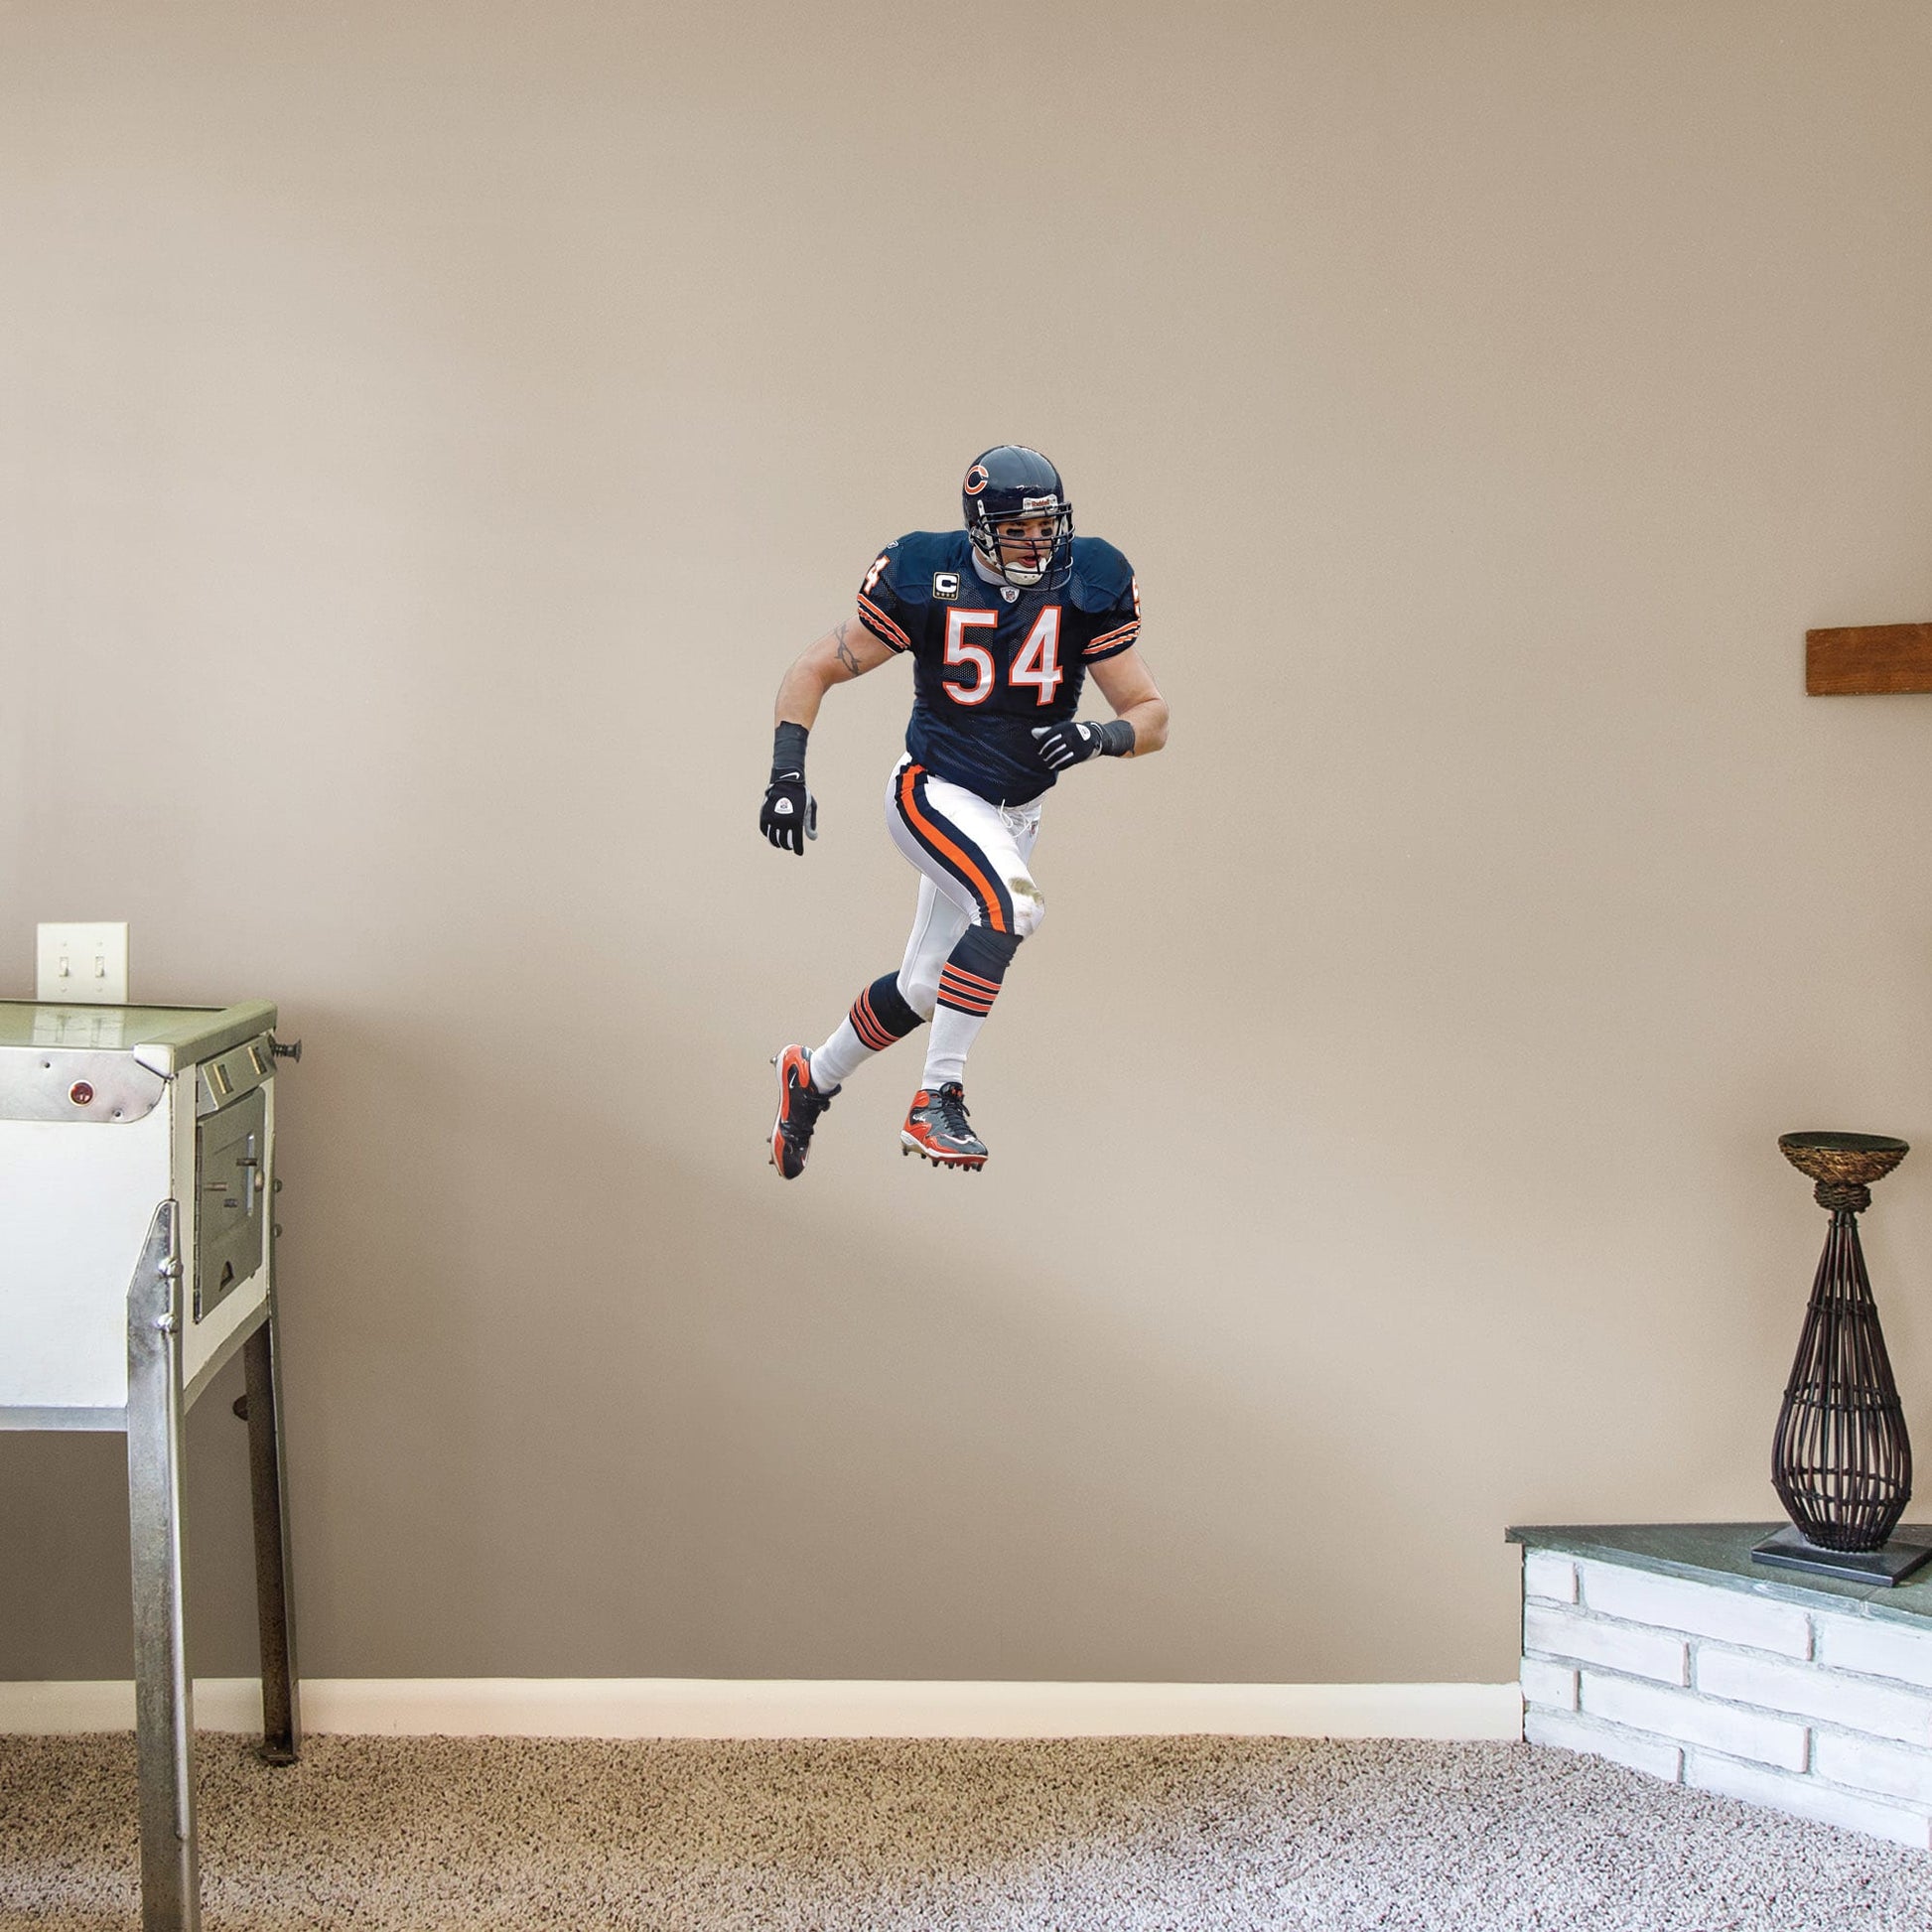 X-Large Athlete + 2 Decals (21"W x 38"H) For 13 years, the Chicago Bears watched #54 earn his place as one of the Top 100 Bears of All time. Rep the navy blue and burnt orange with a high-grade vinyl decal of Da Bears legend Brian Urlacher. Removable, reusable, and tear-resistant, this Hall of Famer is great for bedrooms, man caves, or even as a temporary party decoration. Bear down, Chicago Bears!